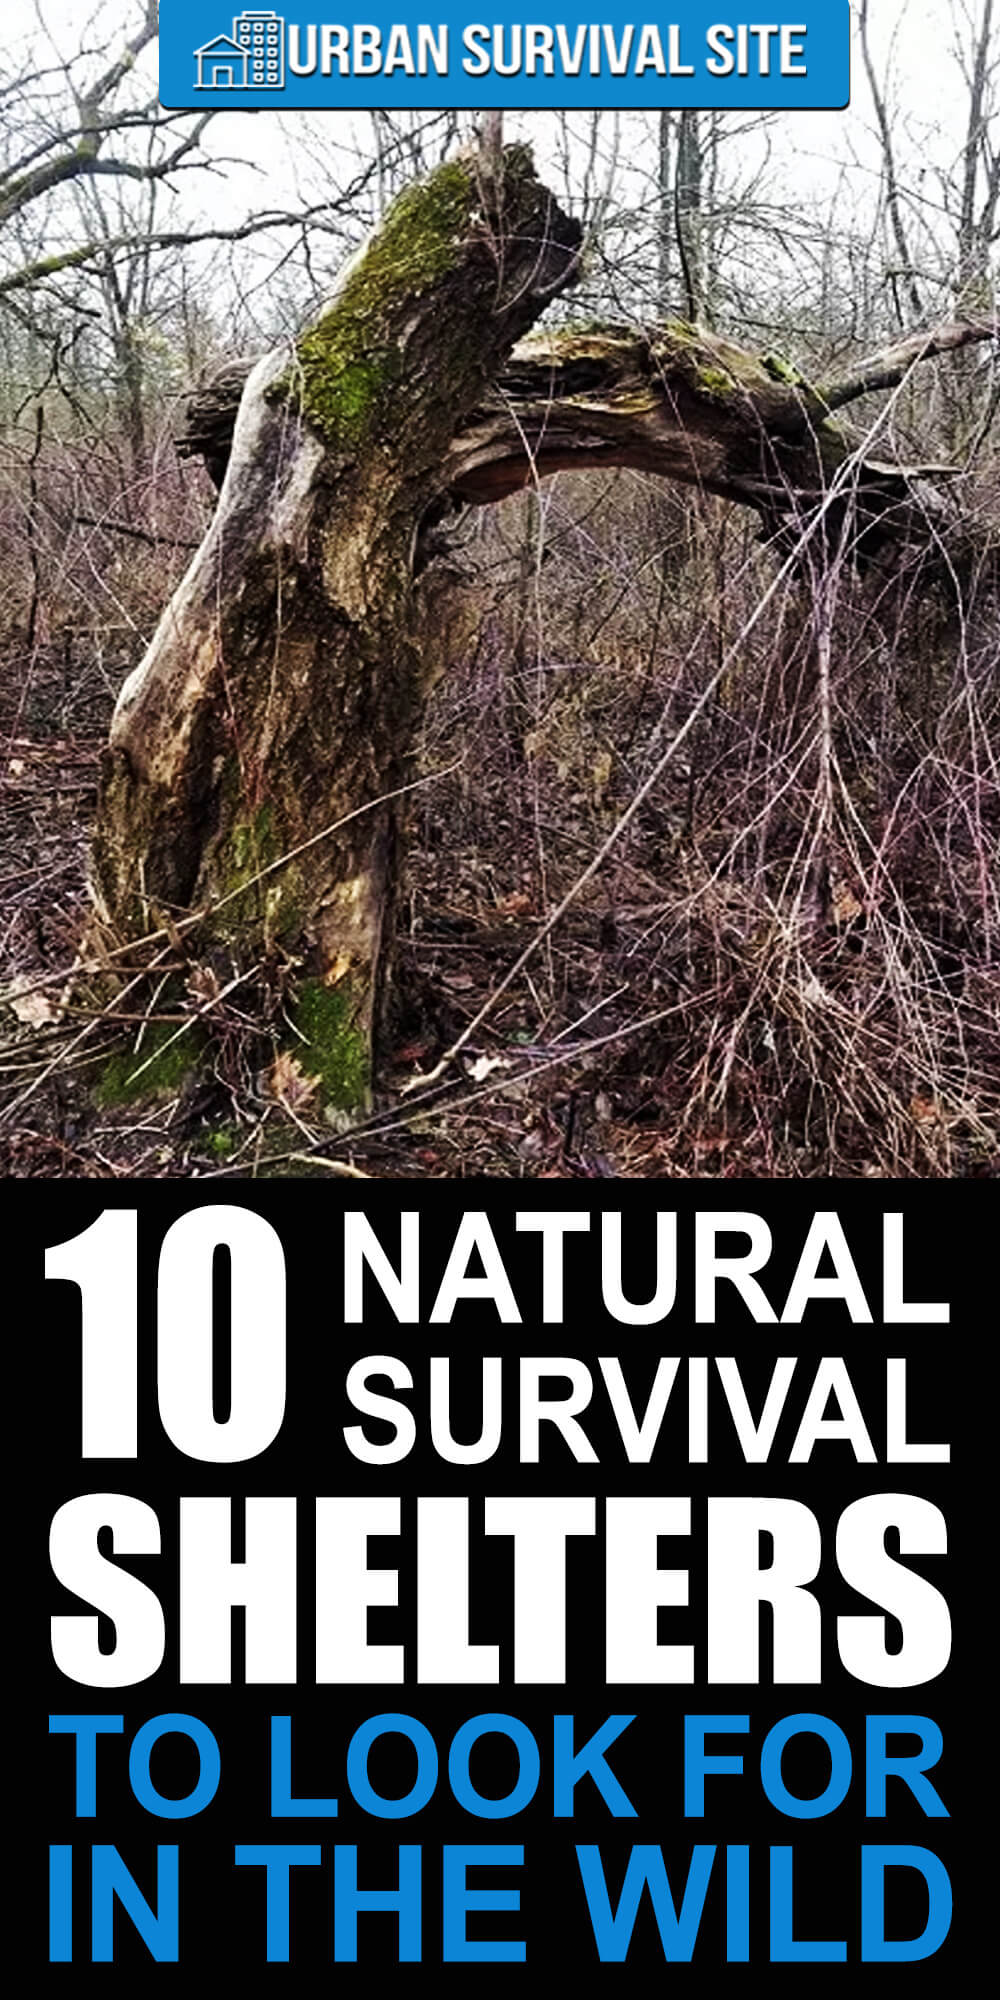 10 Natural Survival Shelters To Look For In The Wild